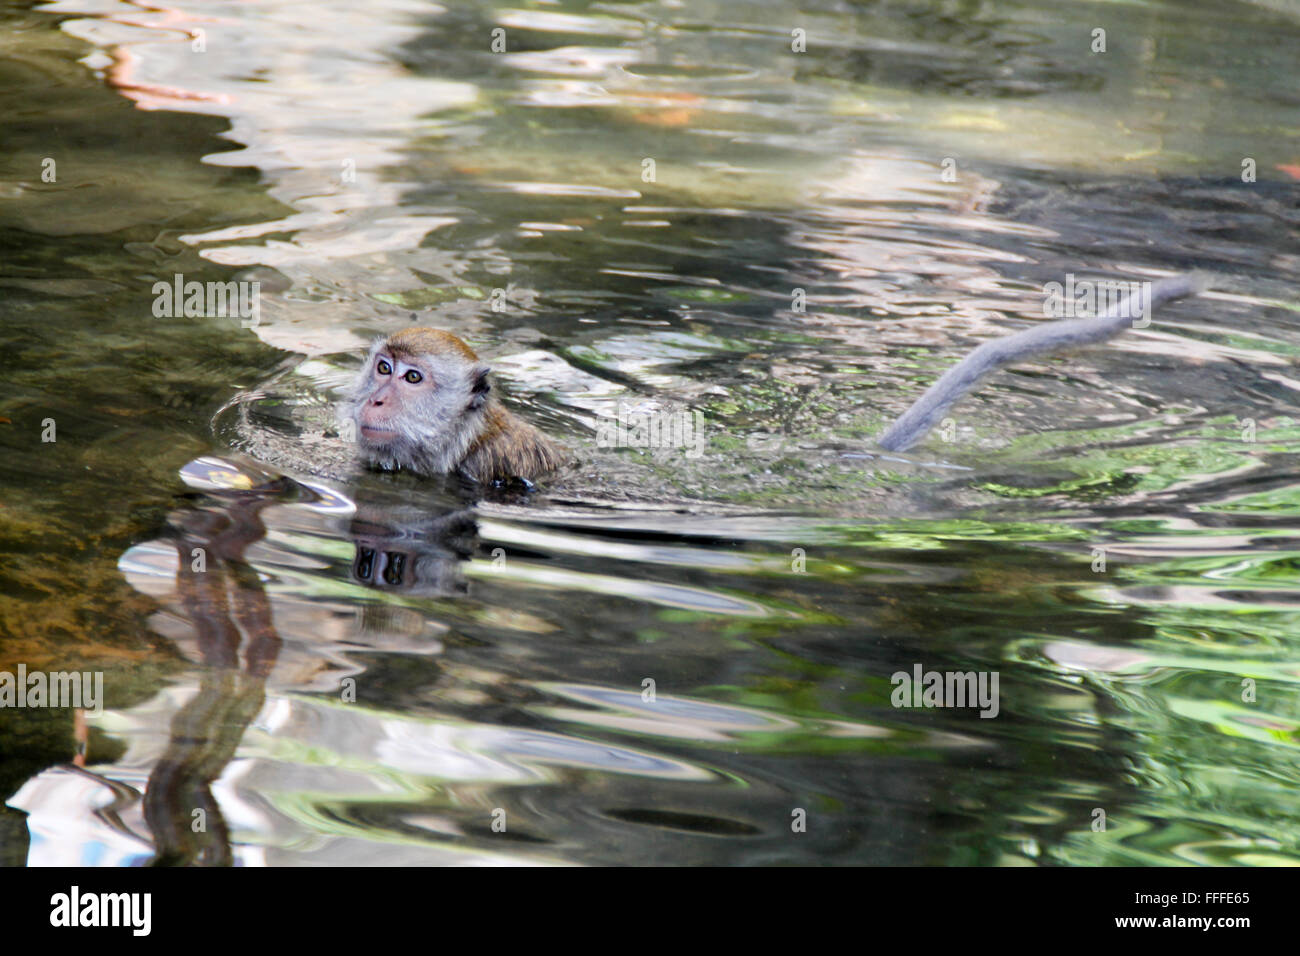 Macaque Monkey Swimming in a pond. Stock Photo